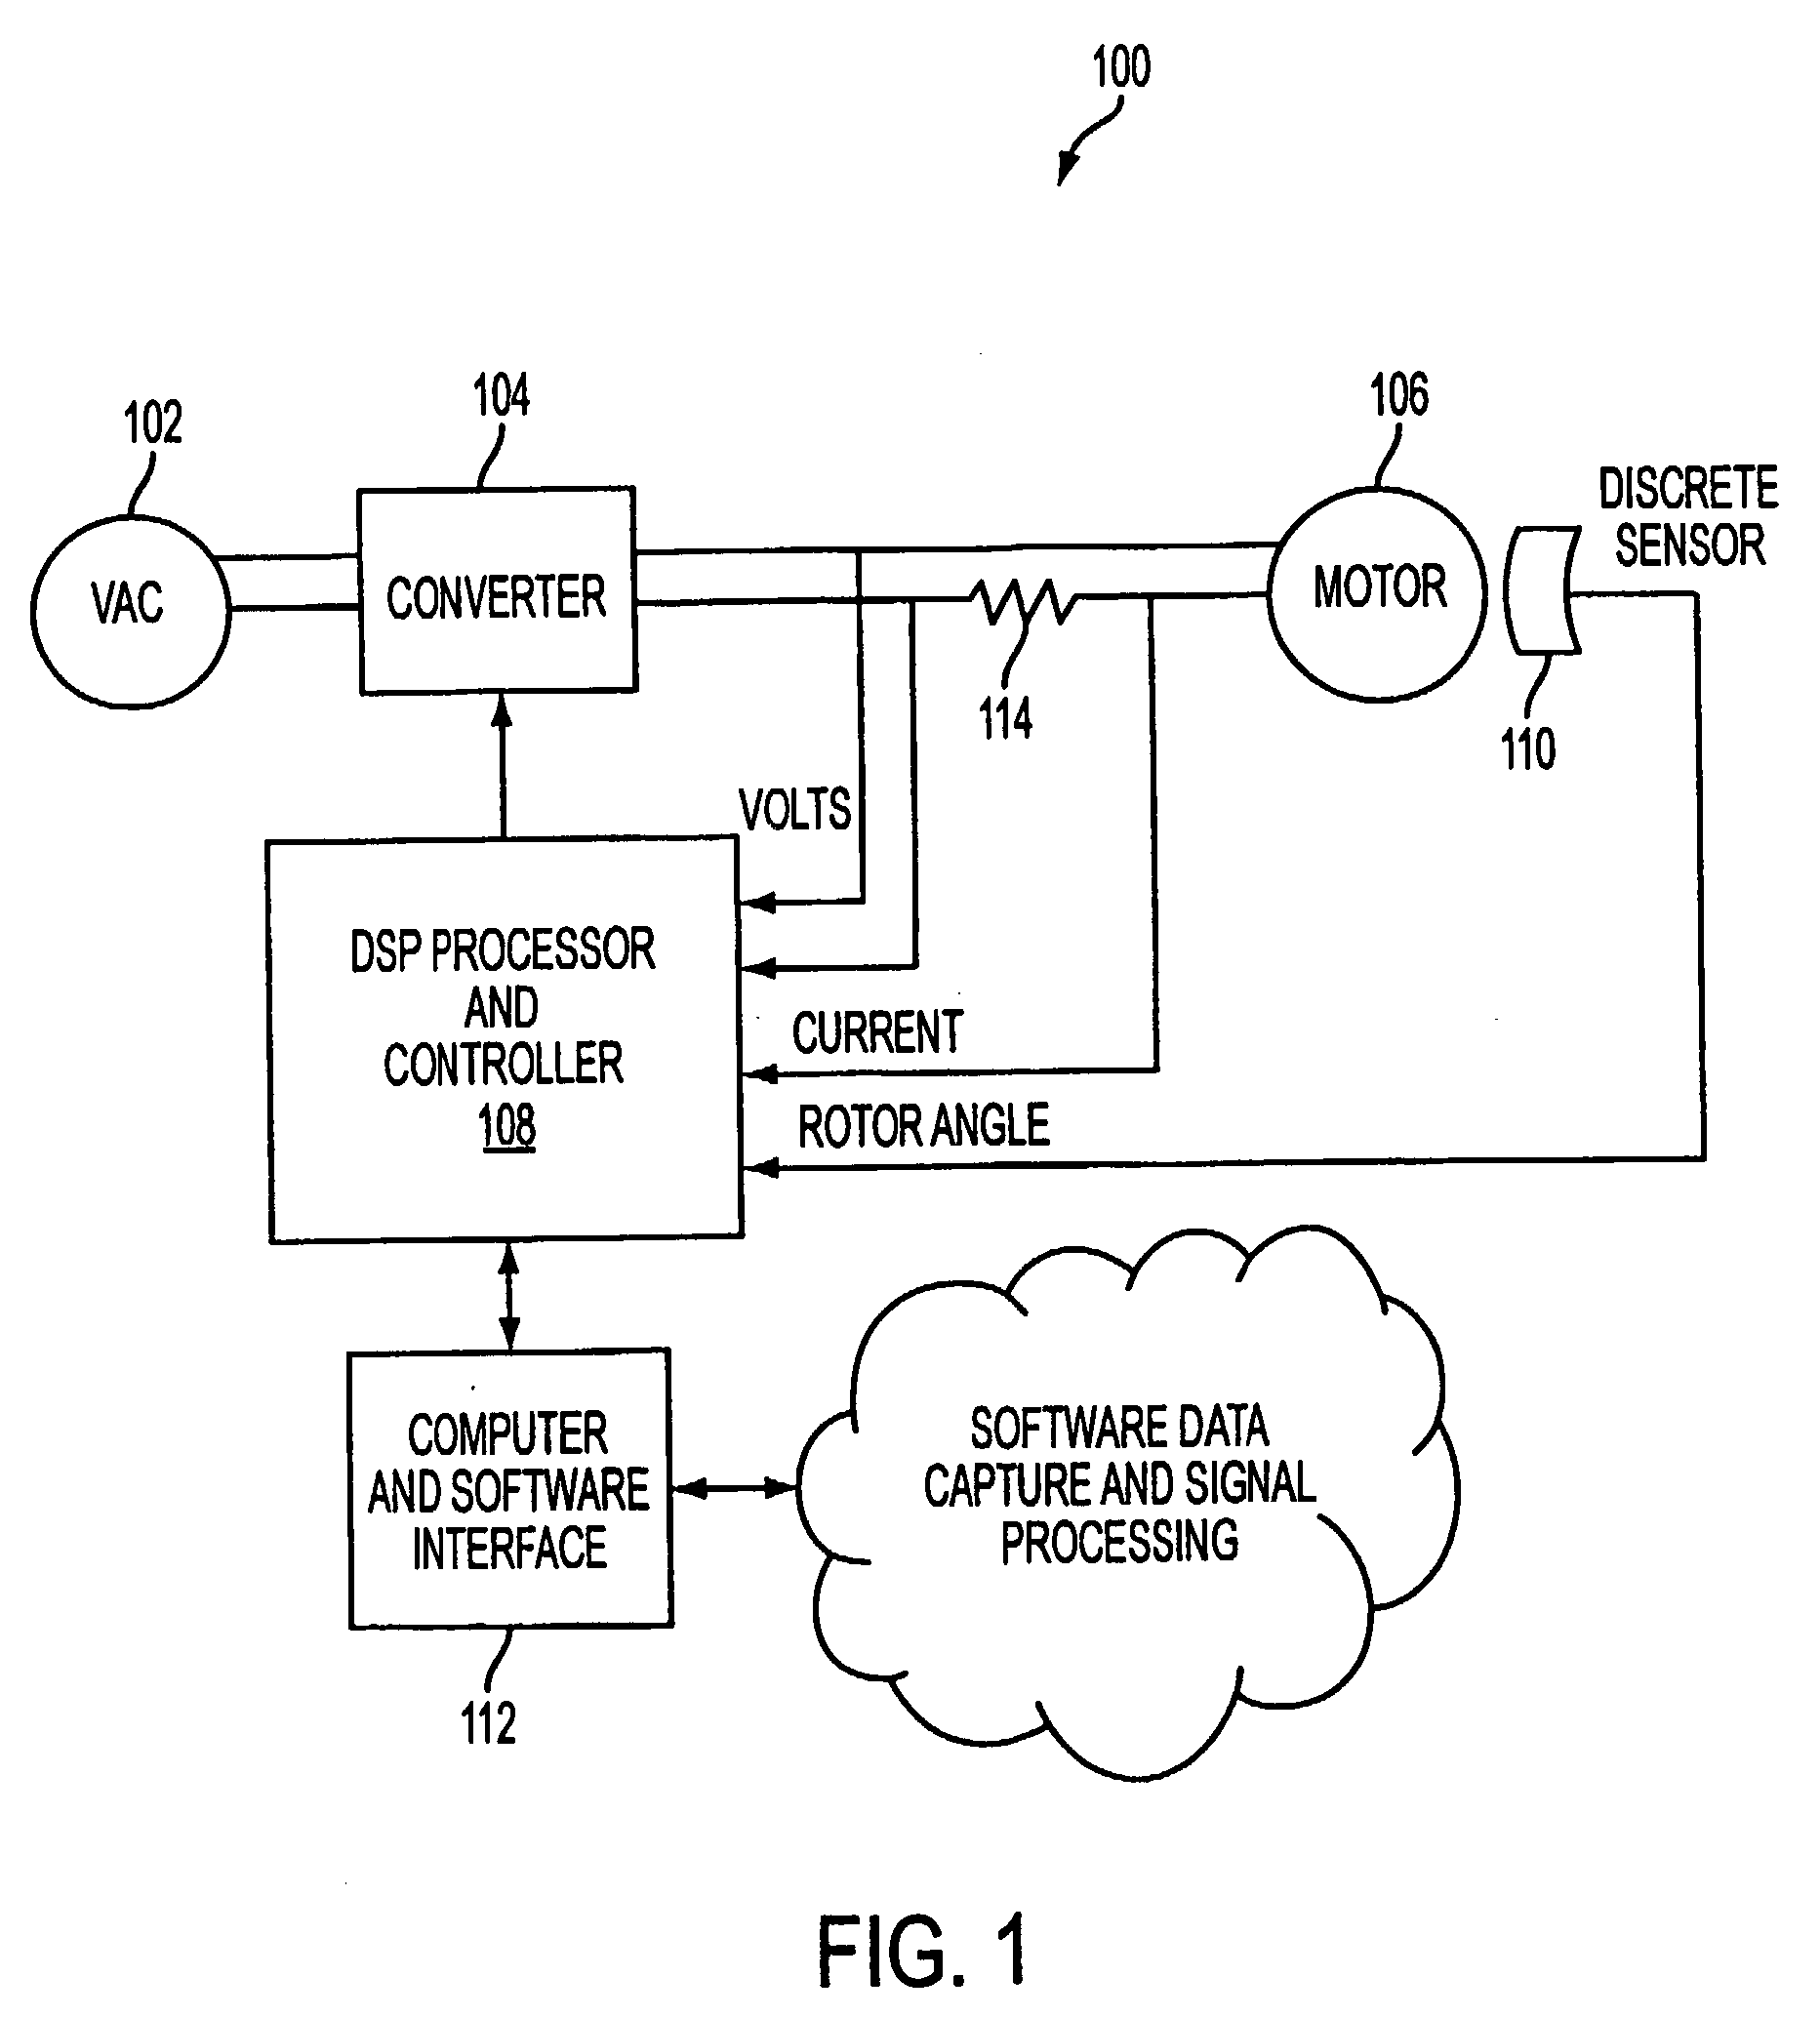 System and Method for Collecting Characteristic Information of a Motor, Neural Network and Method for Estimating Regions of Motor Operation from Information Characterizing the Motor, and System and Method for Controlling Motor